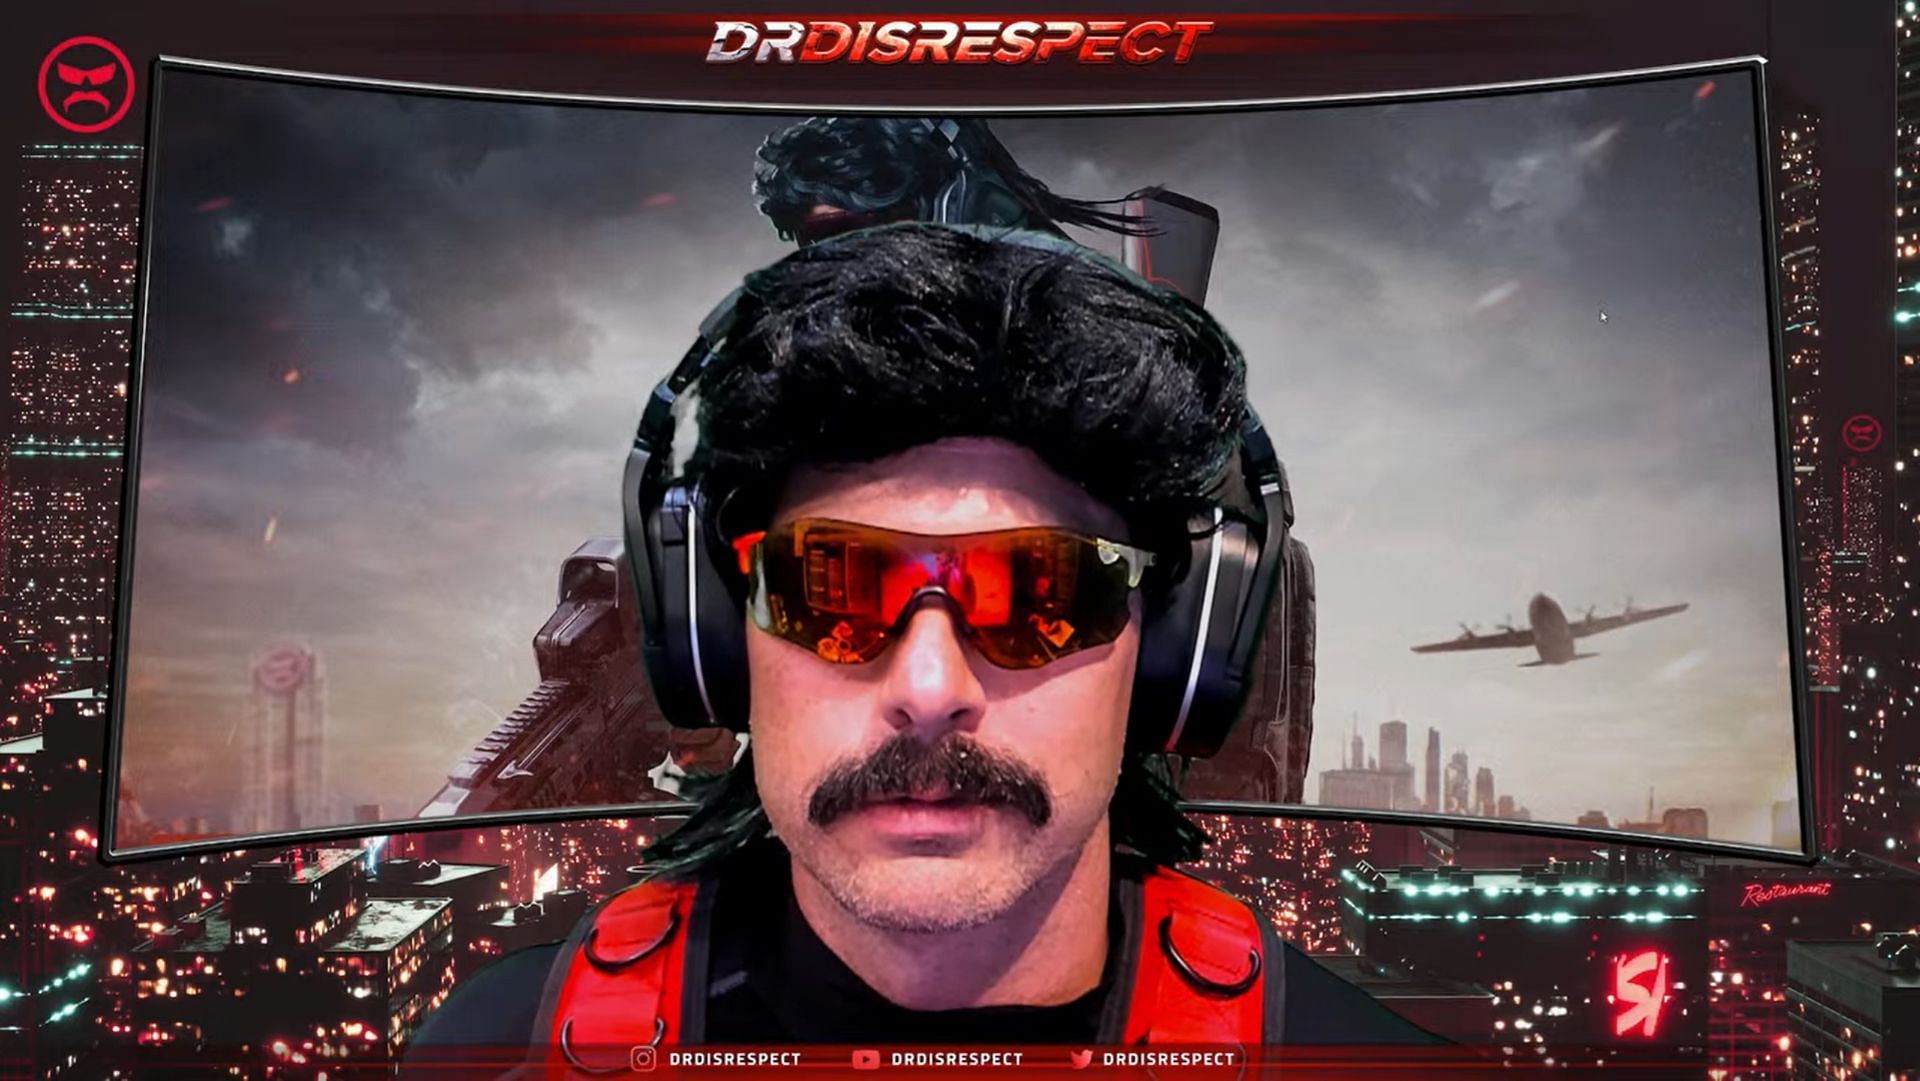 Dr DisRespect is considering a temporary break from streaming (Image via- DrDisrespect/YouTube)